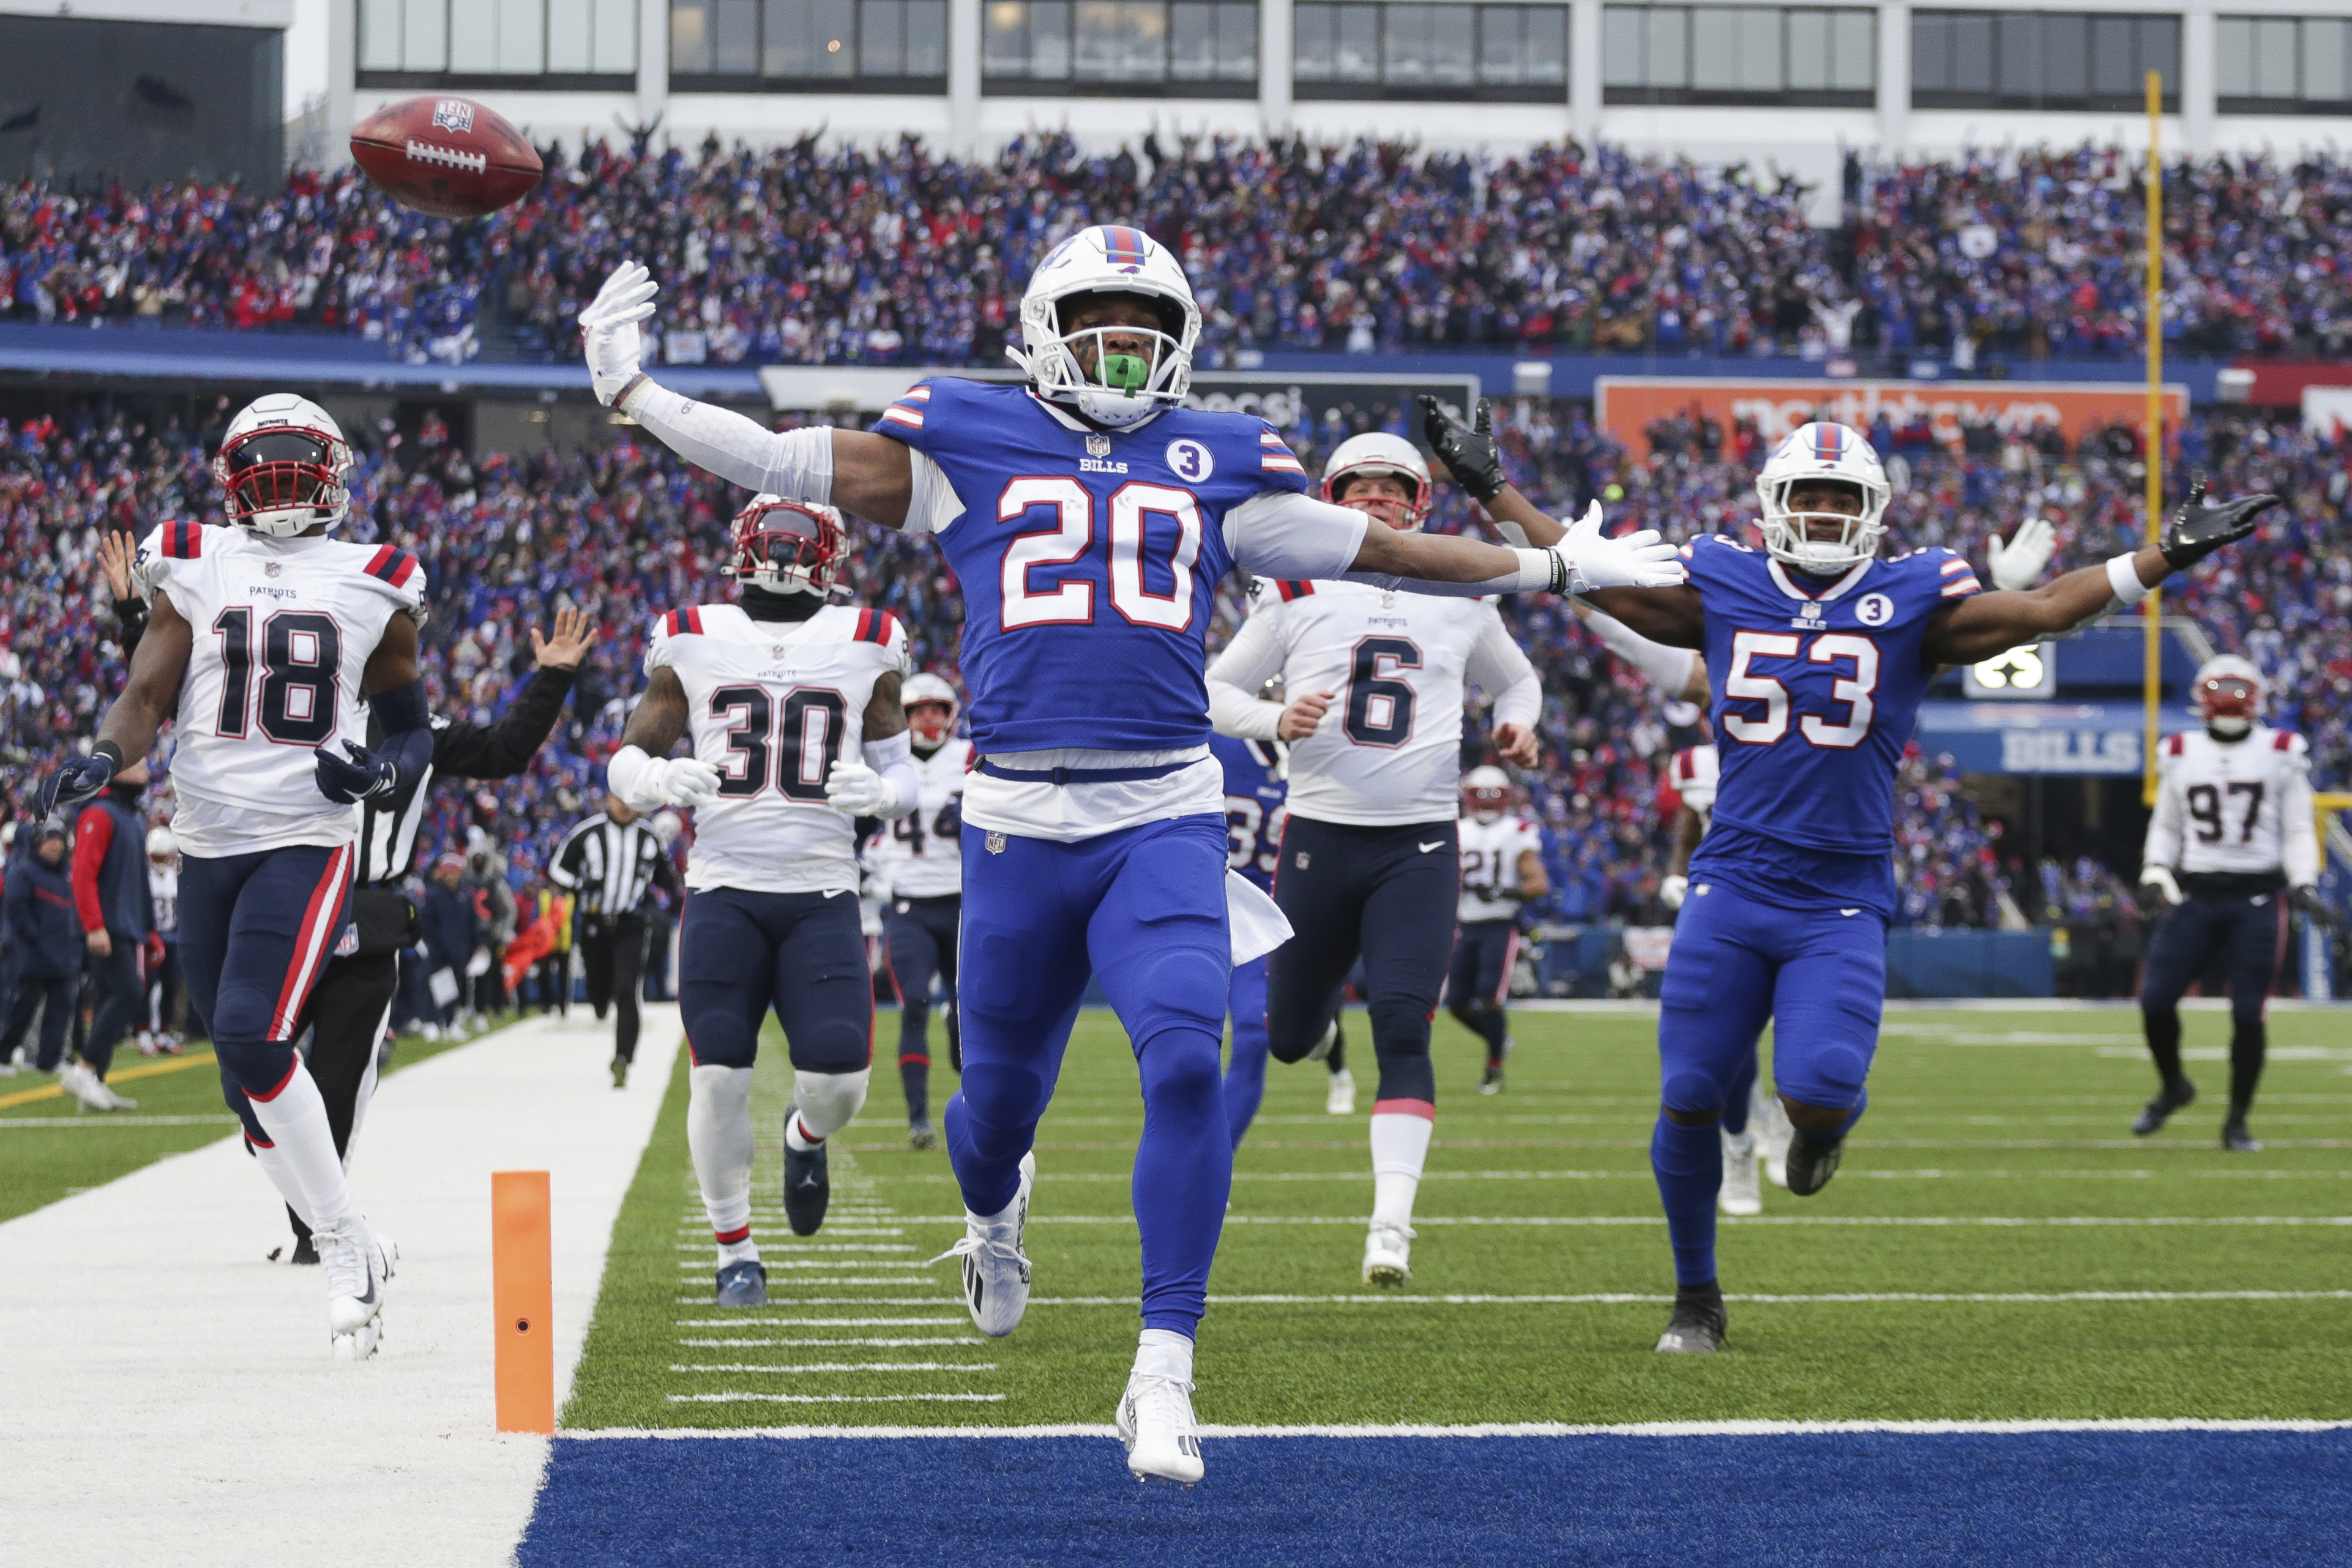 5 takeaways from the Bills' emotional 35-23 win over the Patriots